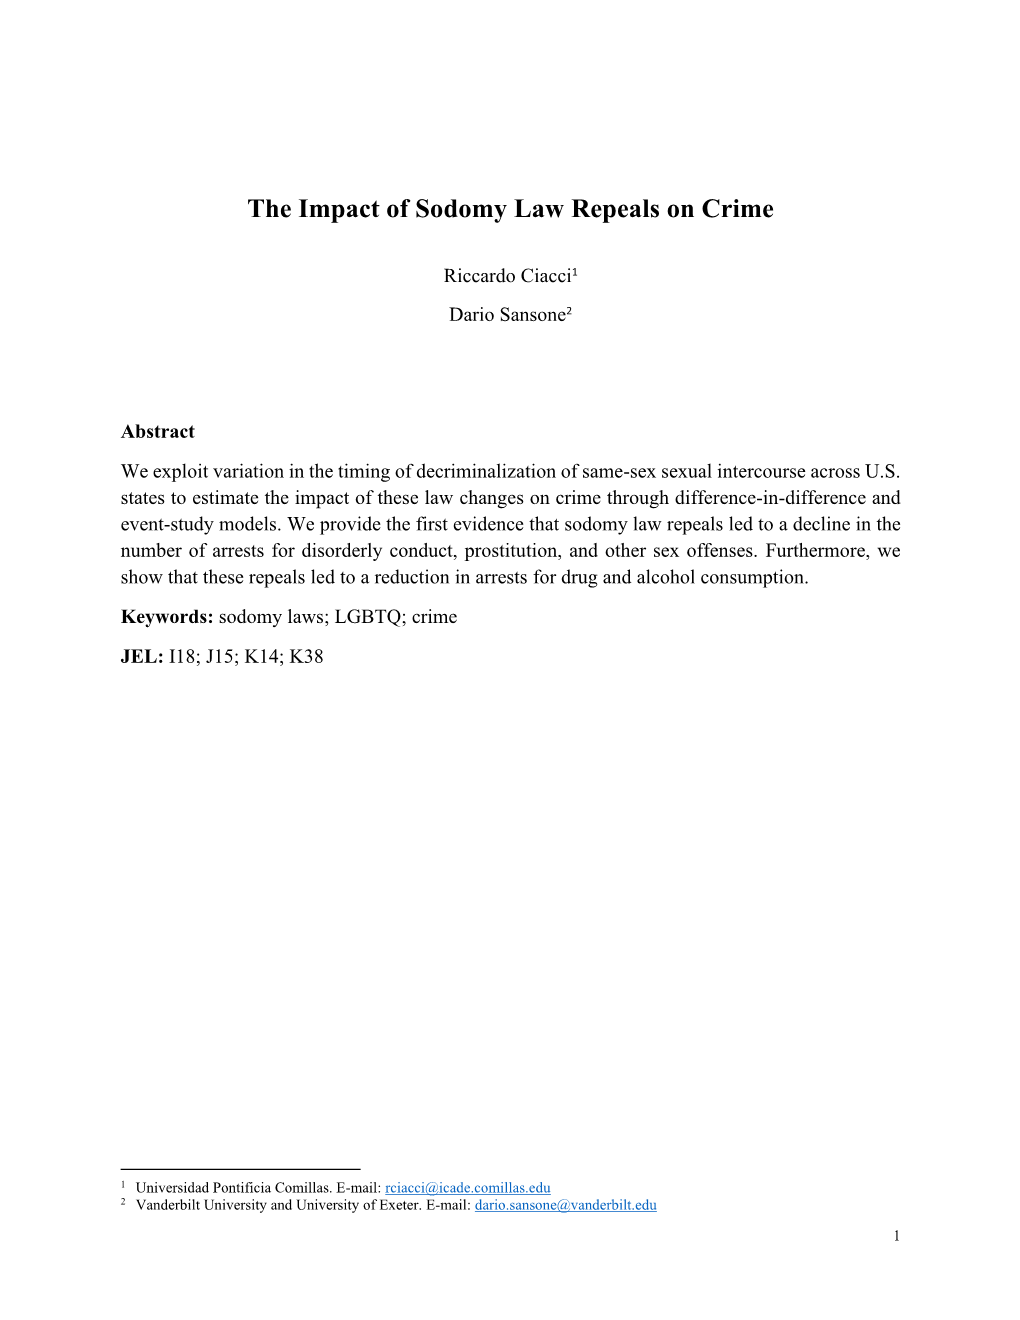 The Impact of Sodomy Law Repeals on Crime